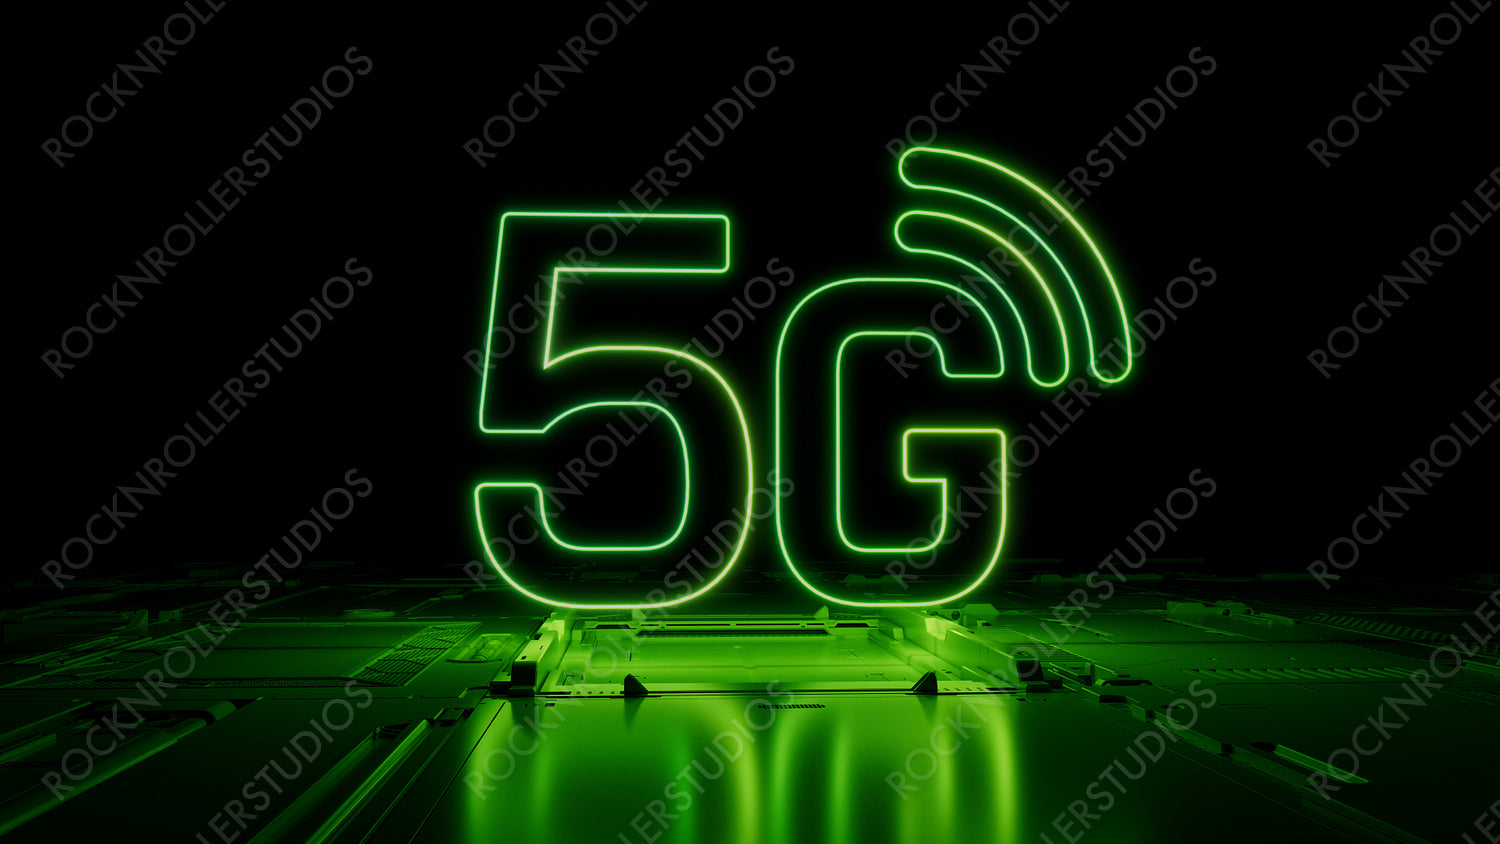 Green Wireless Technology Concept with 5G symbol as a neon light. Vibrant colored icon, on a black background with high tech floor. 3D Render